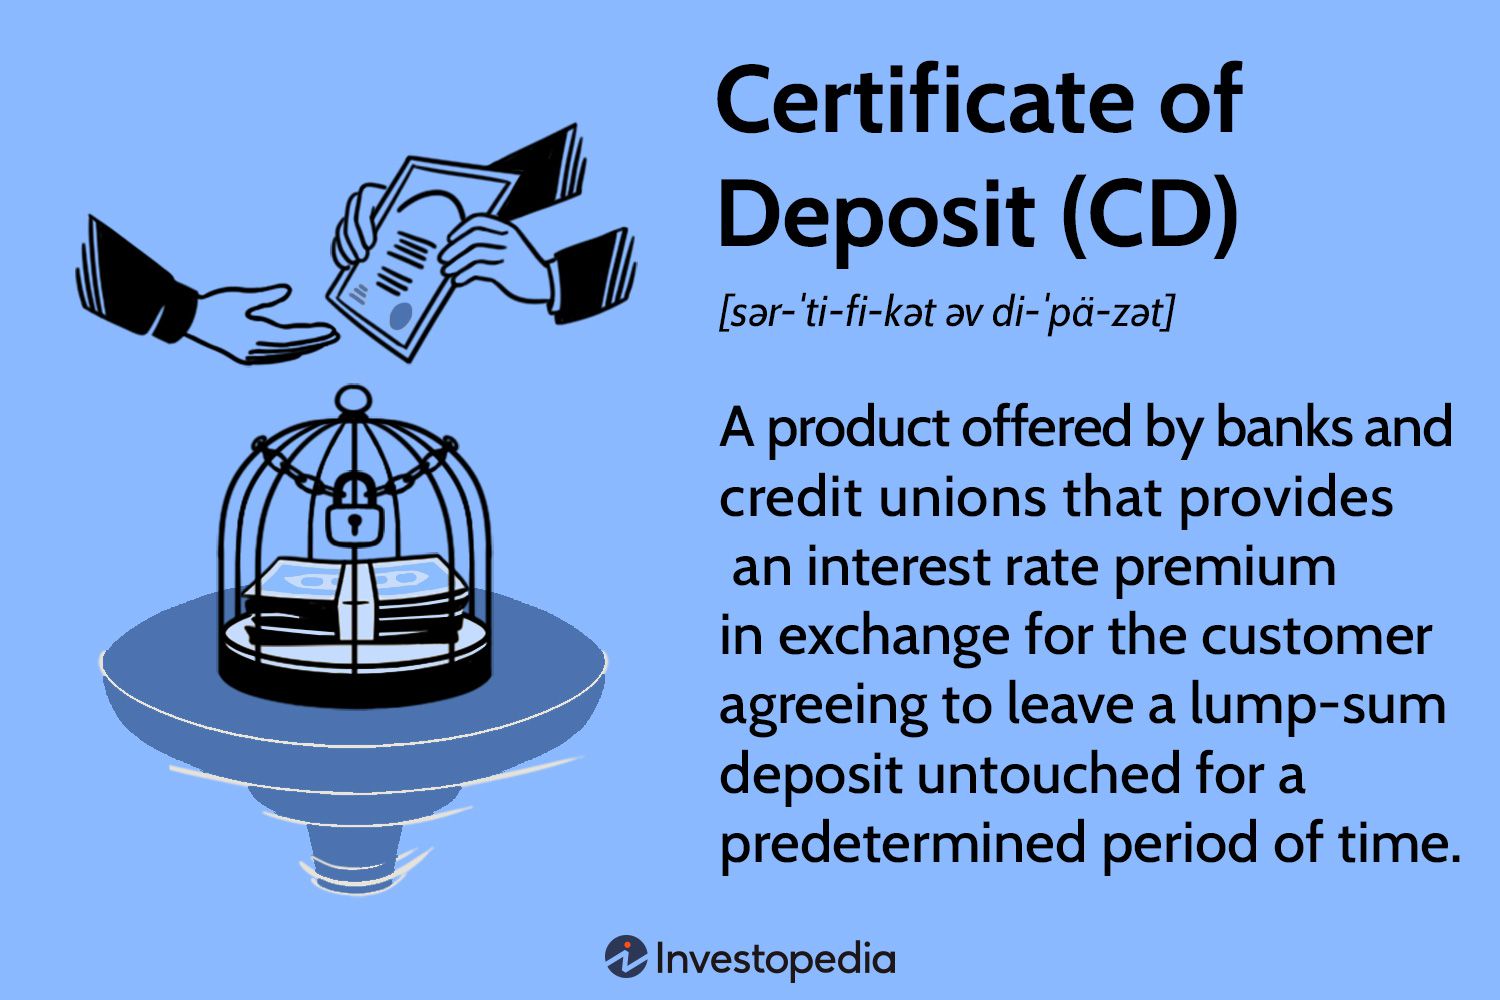 5. How to Invest in a Certificate of Deposit Account